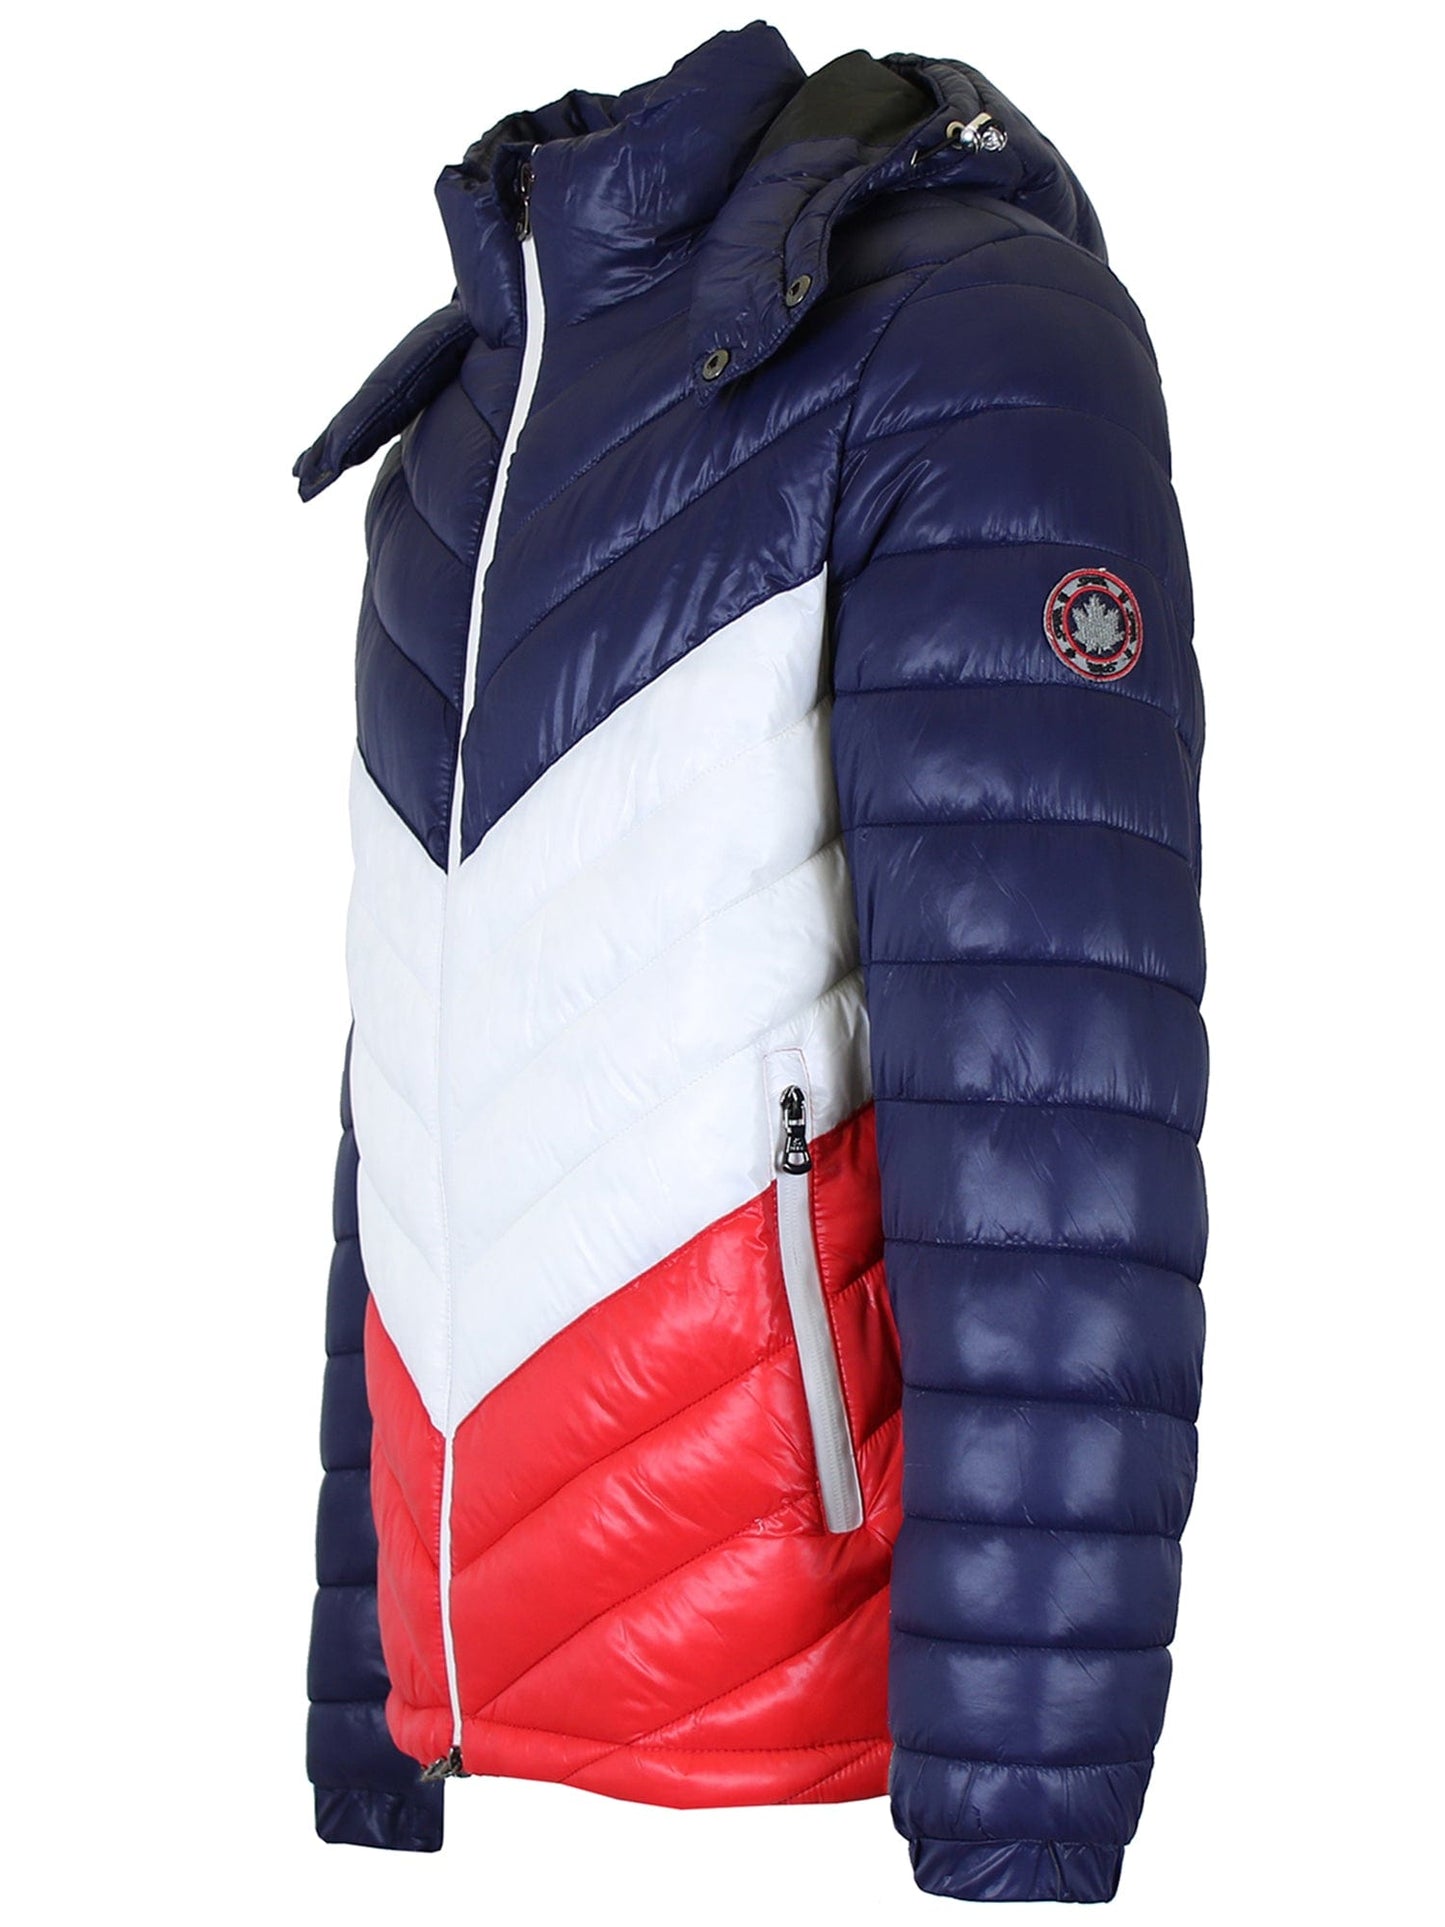 Mens Heavyweight Puffer Bubble Jacket - GalaxybyHarvic